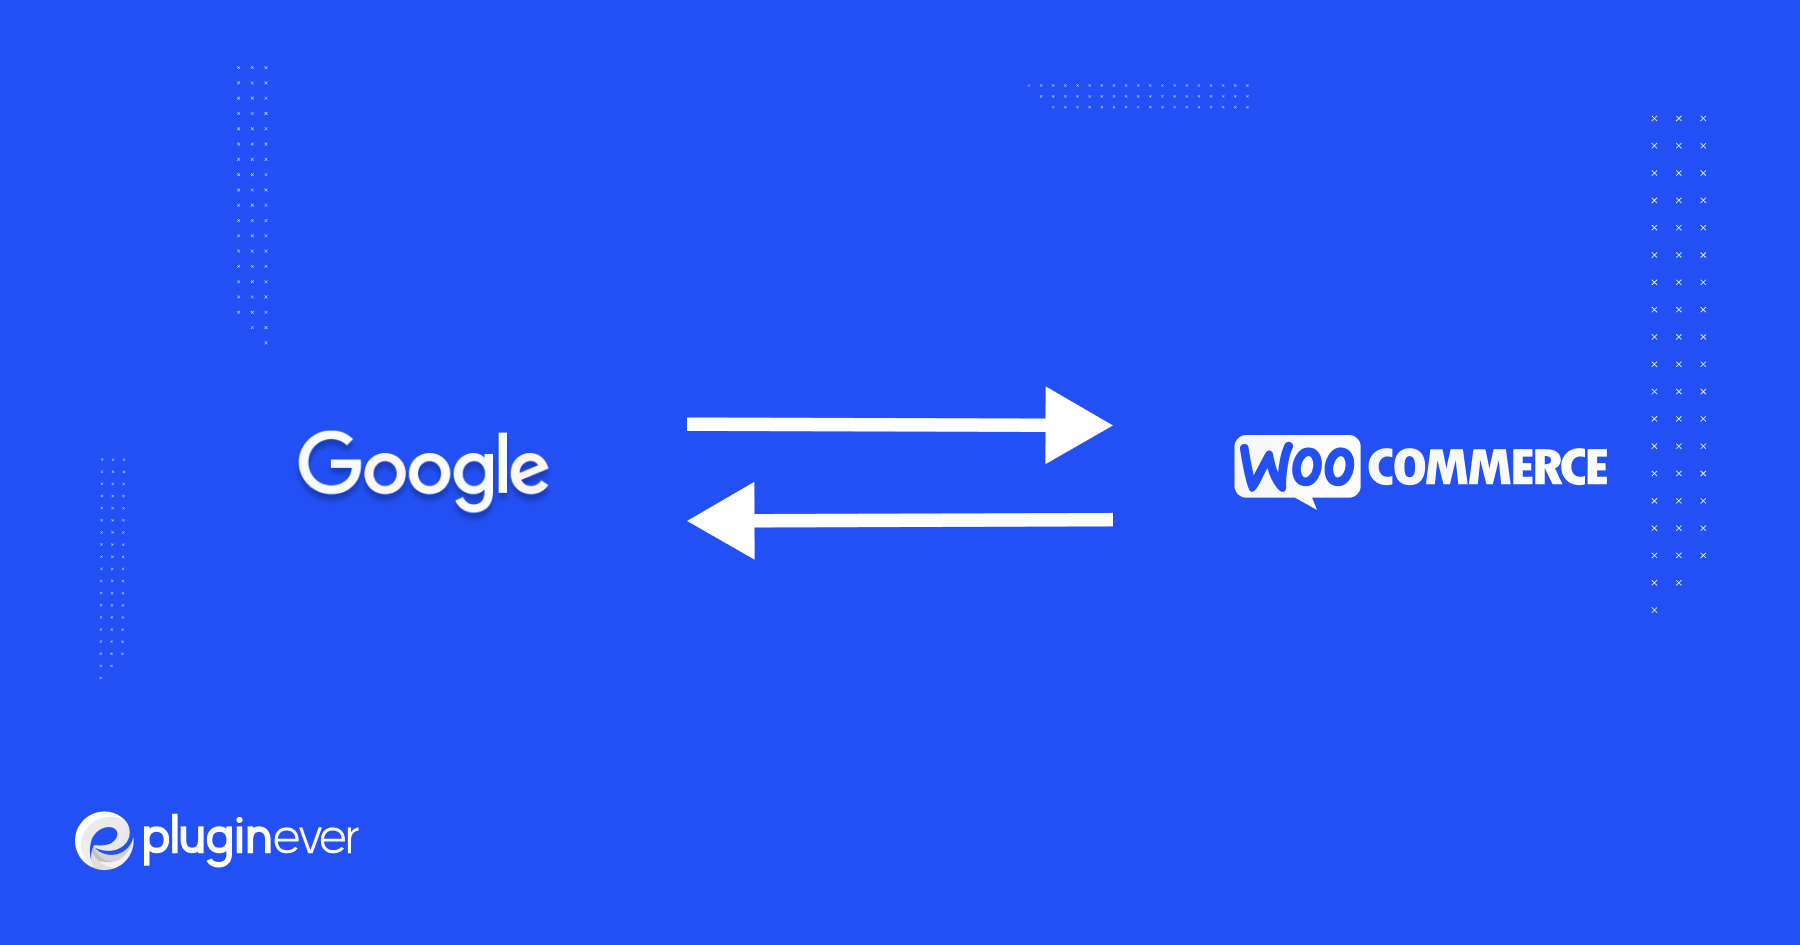 Google integration with WooCommerce